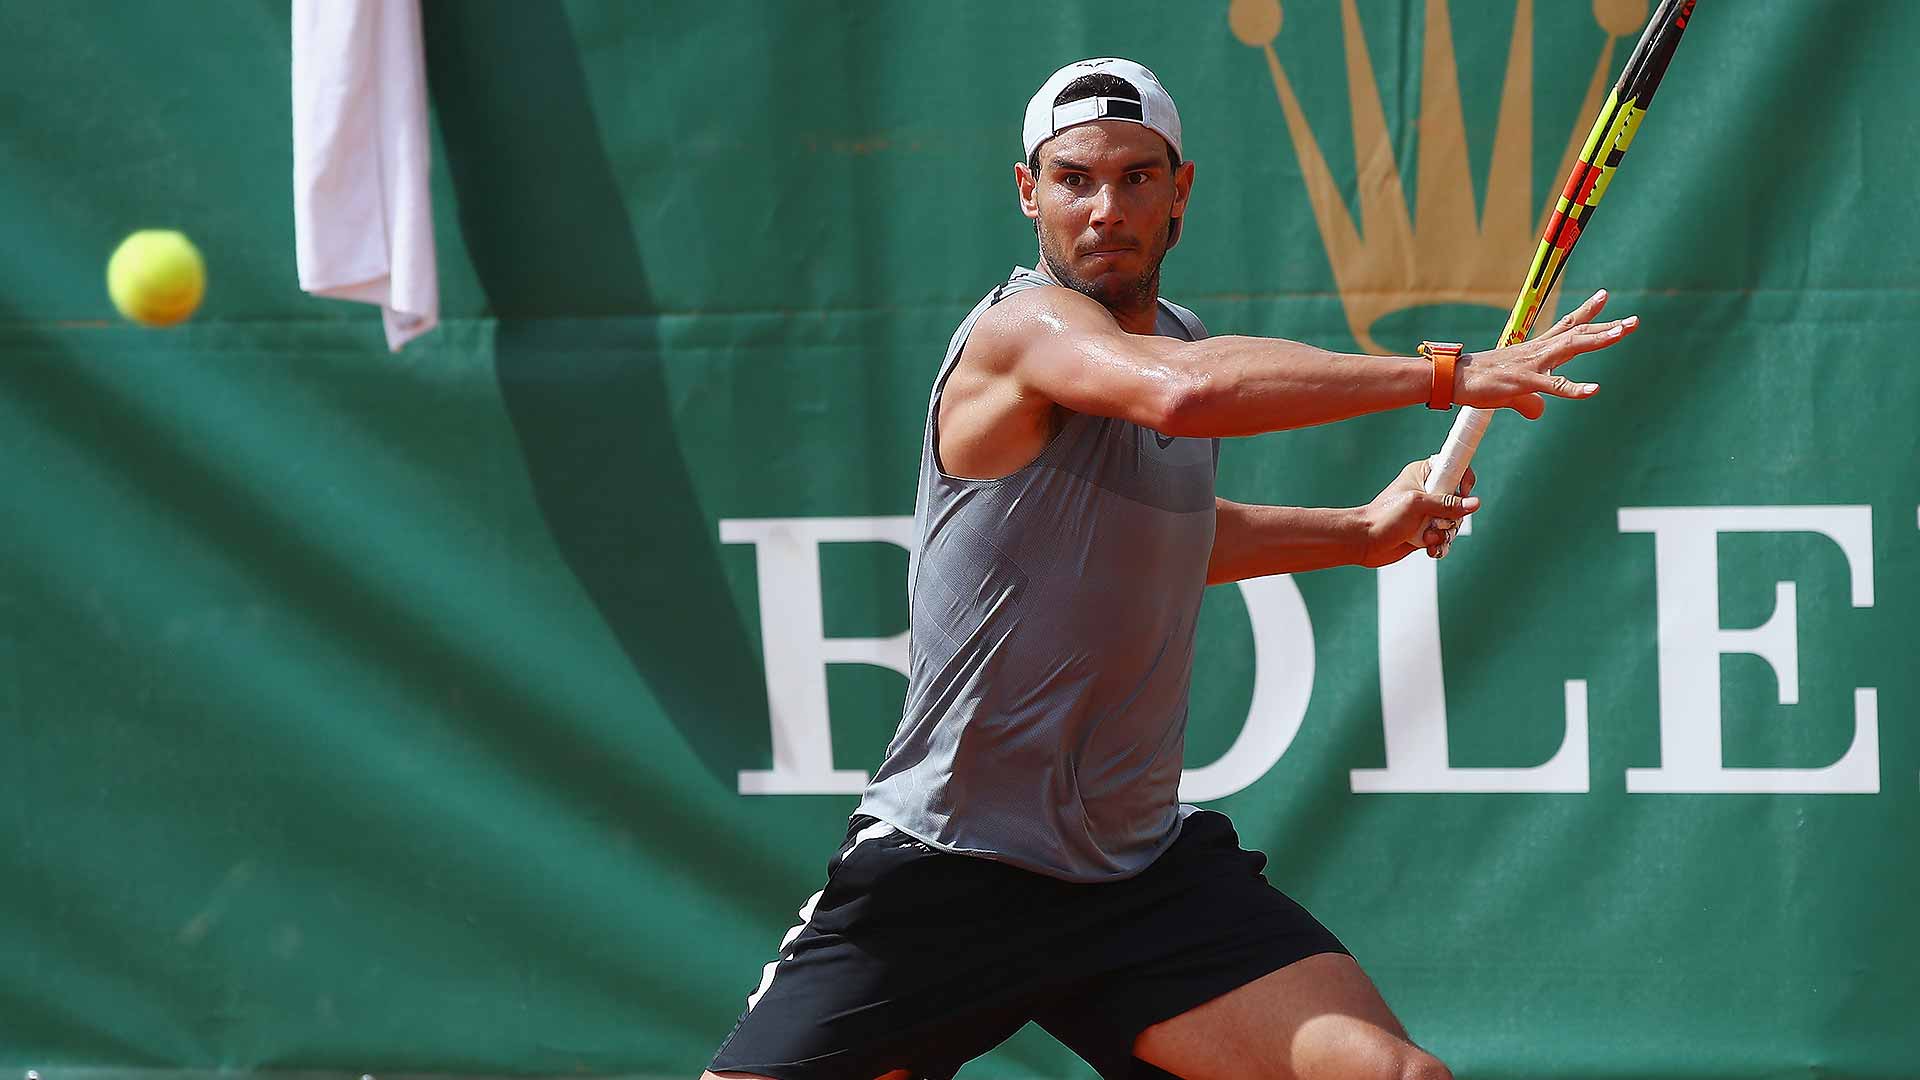 Nadal Rules the Clay